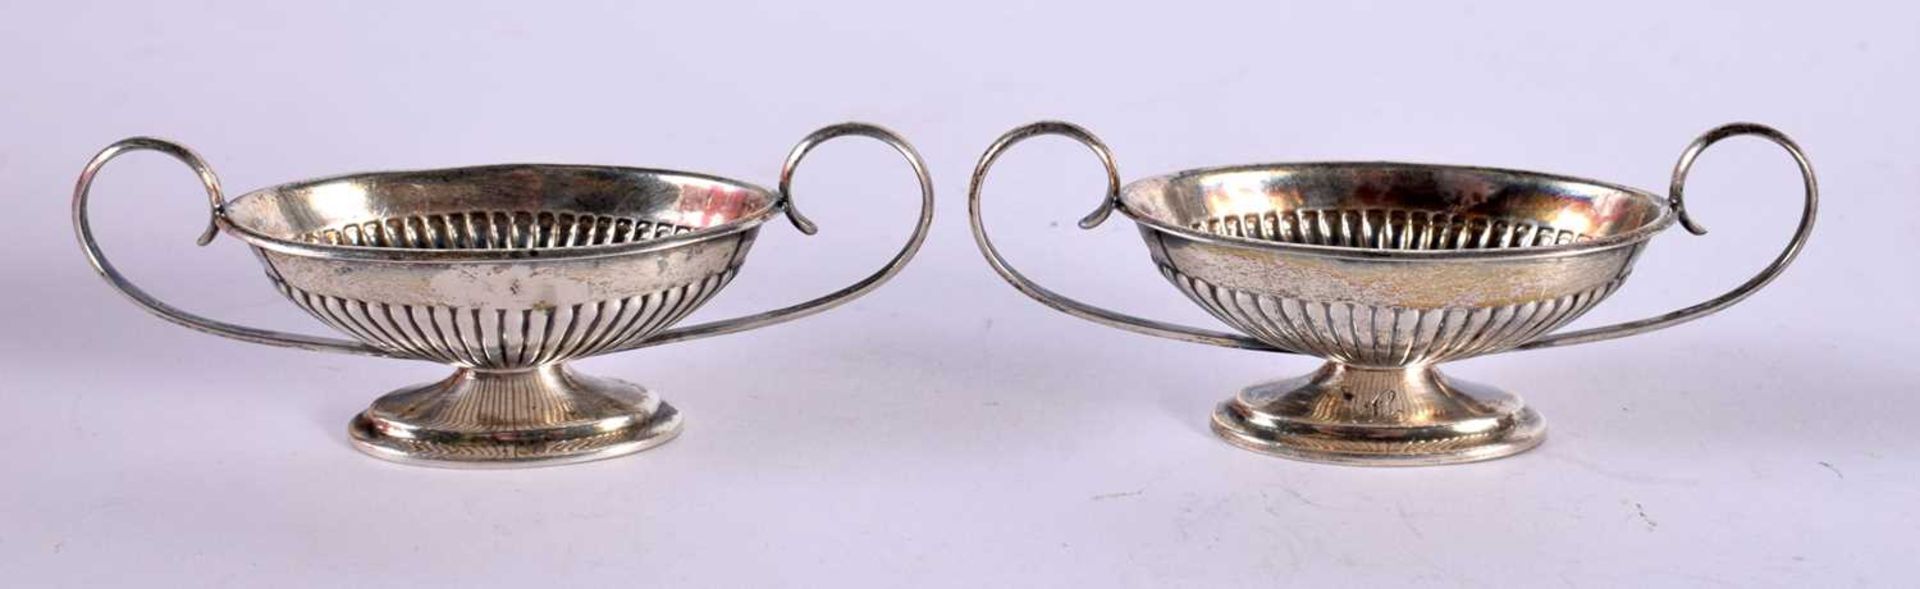 A PAIR OF SILVER CLASSICAL STYLE BOAT SHAPED SALTS. Stamped Sterling, 7.6 cm x 2.6 cm x 3cm, total